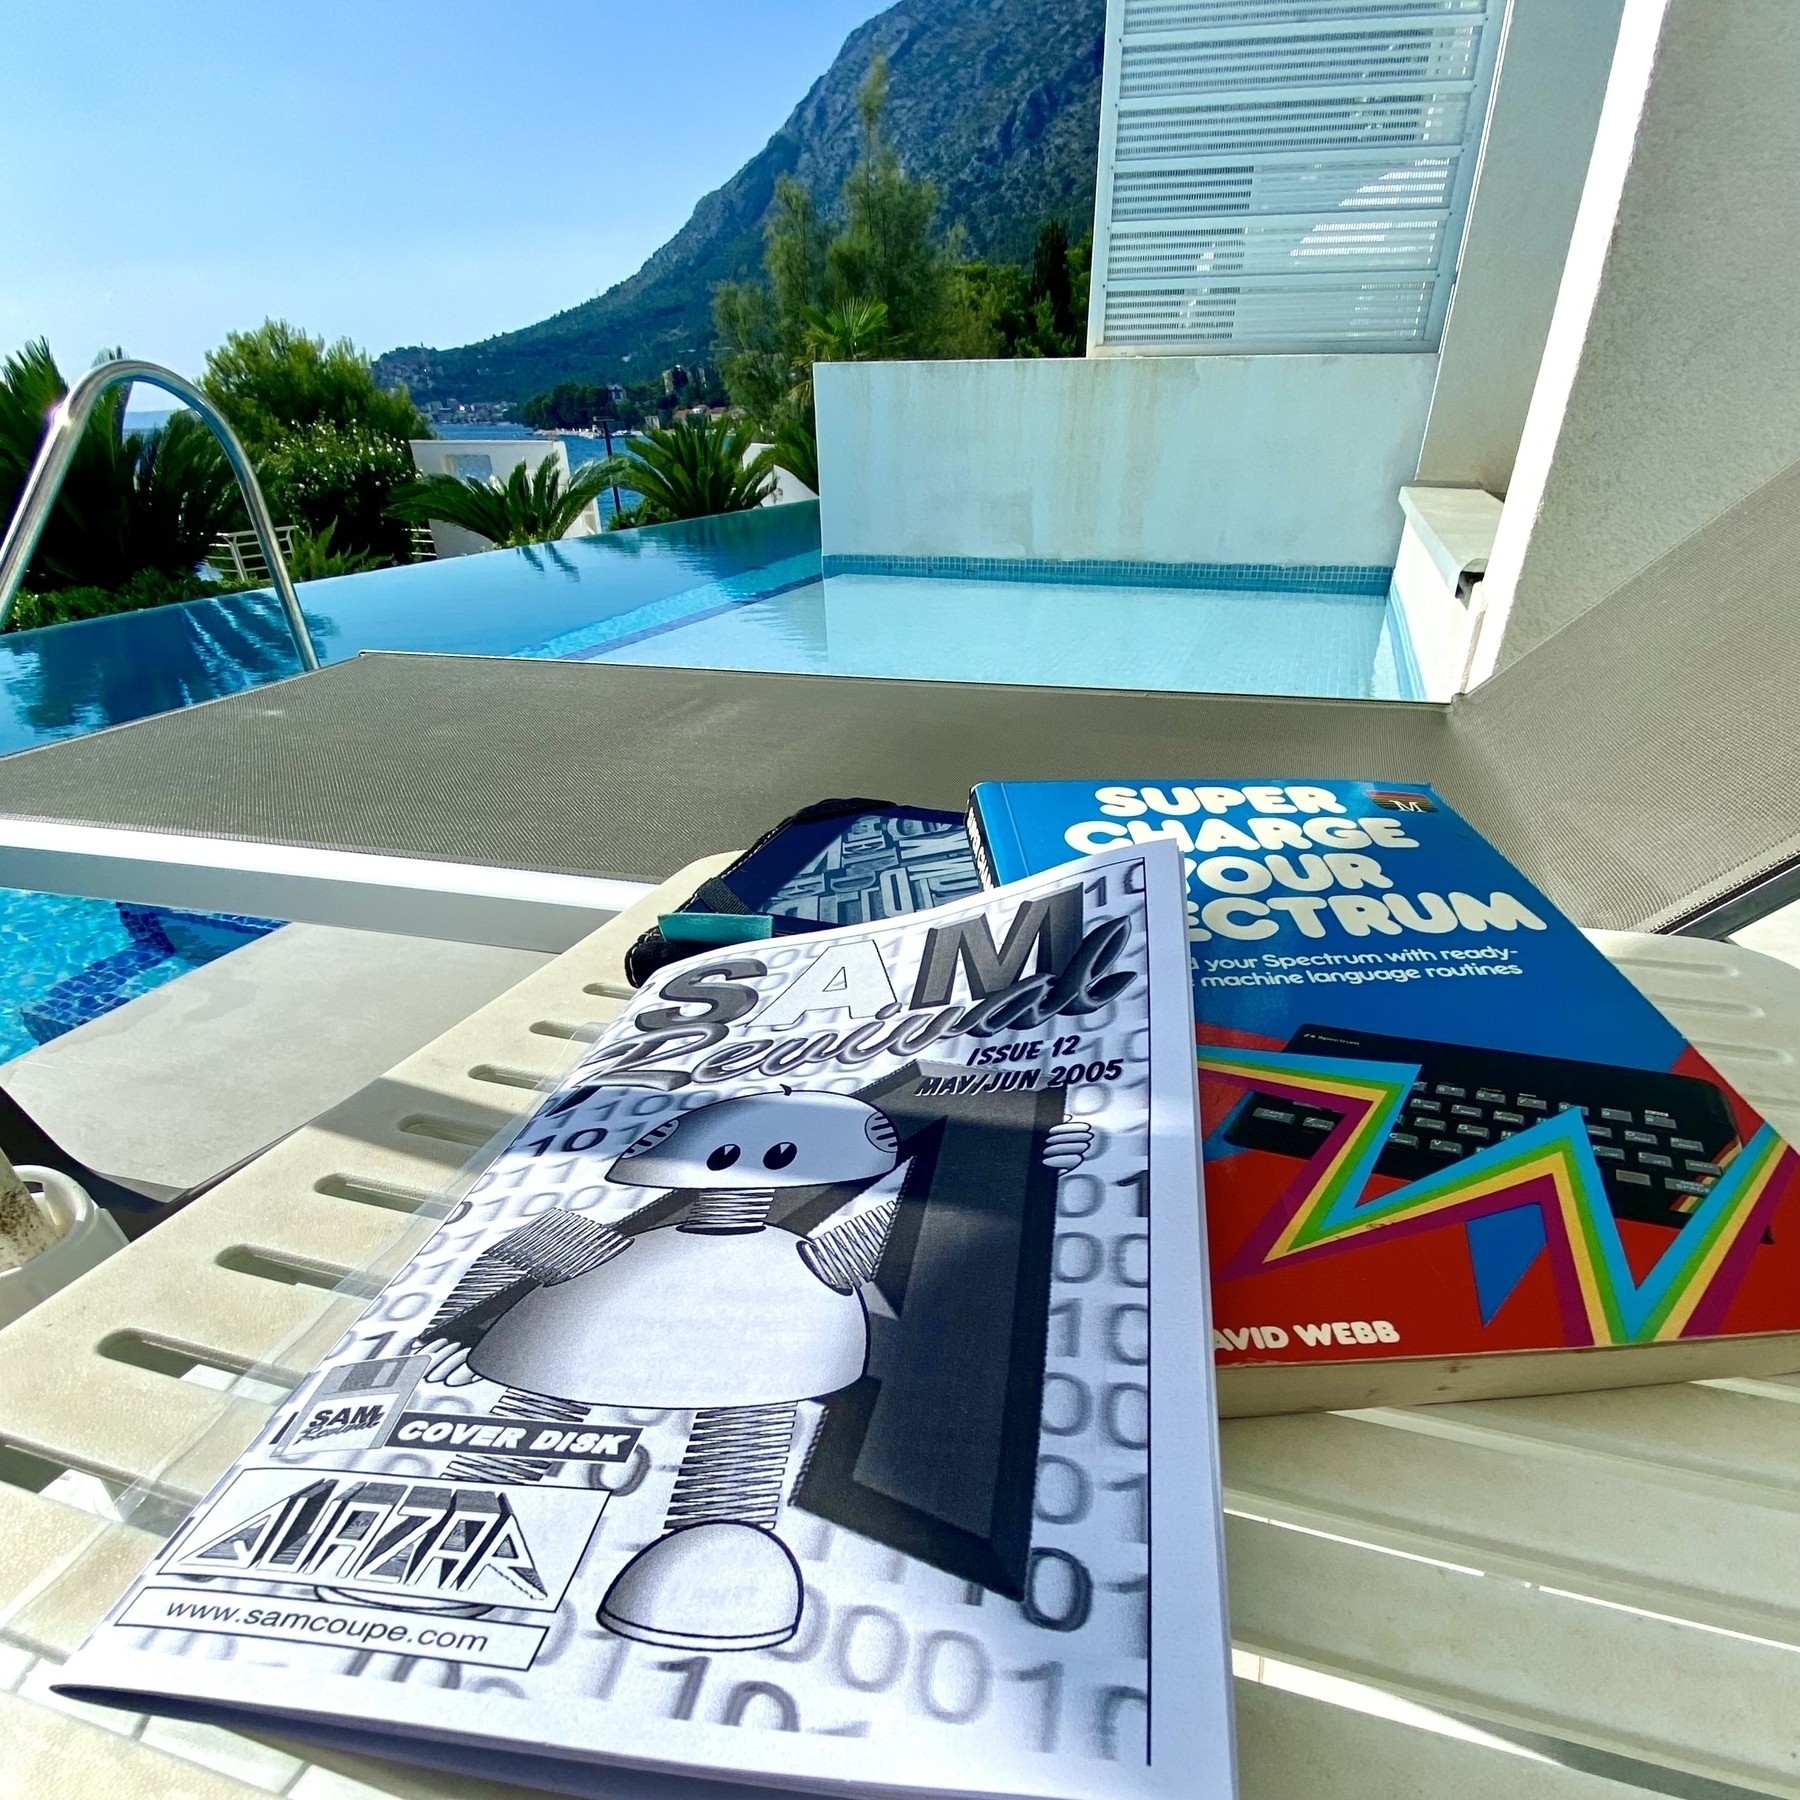 Literature by a swimming pool. “SAM Revival” magazine by Quazar, and “Super Charge Your Spectrum” by David Webb. Palm trees and steep mountains are in the background.